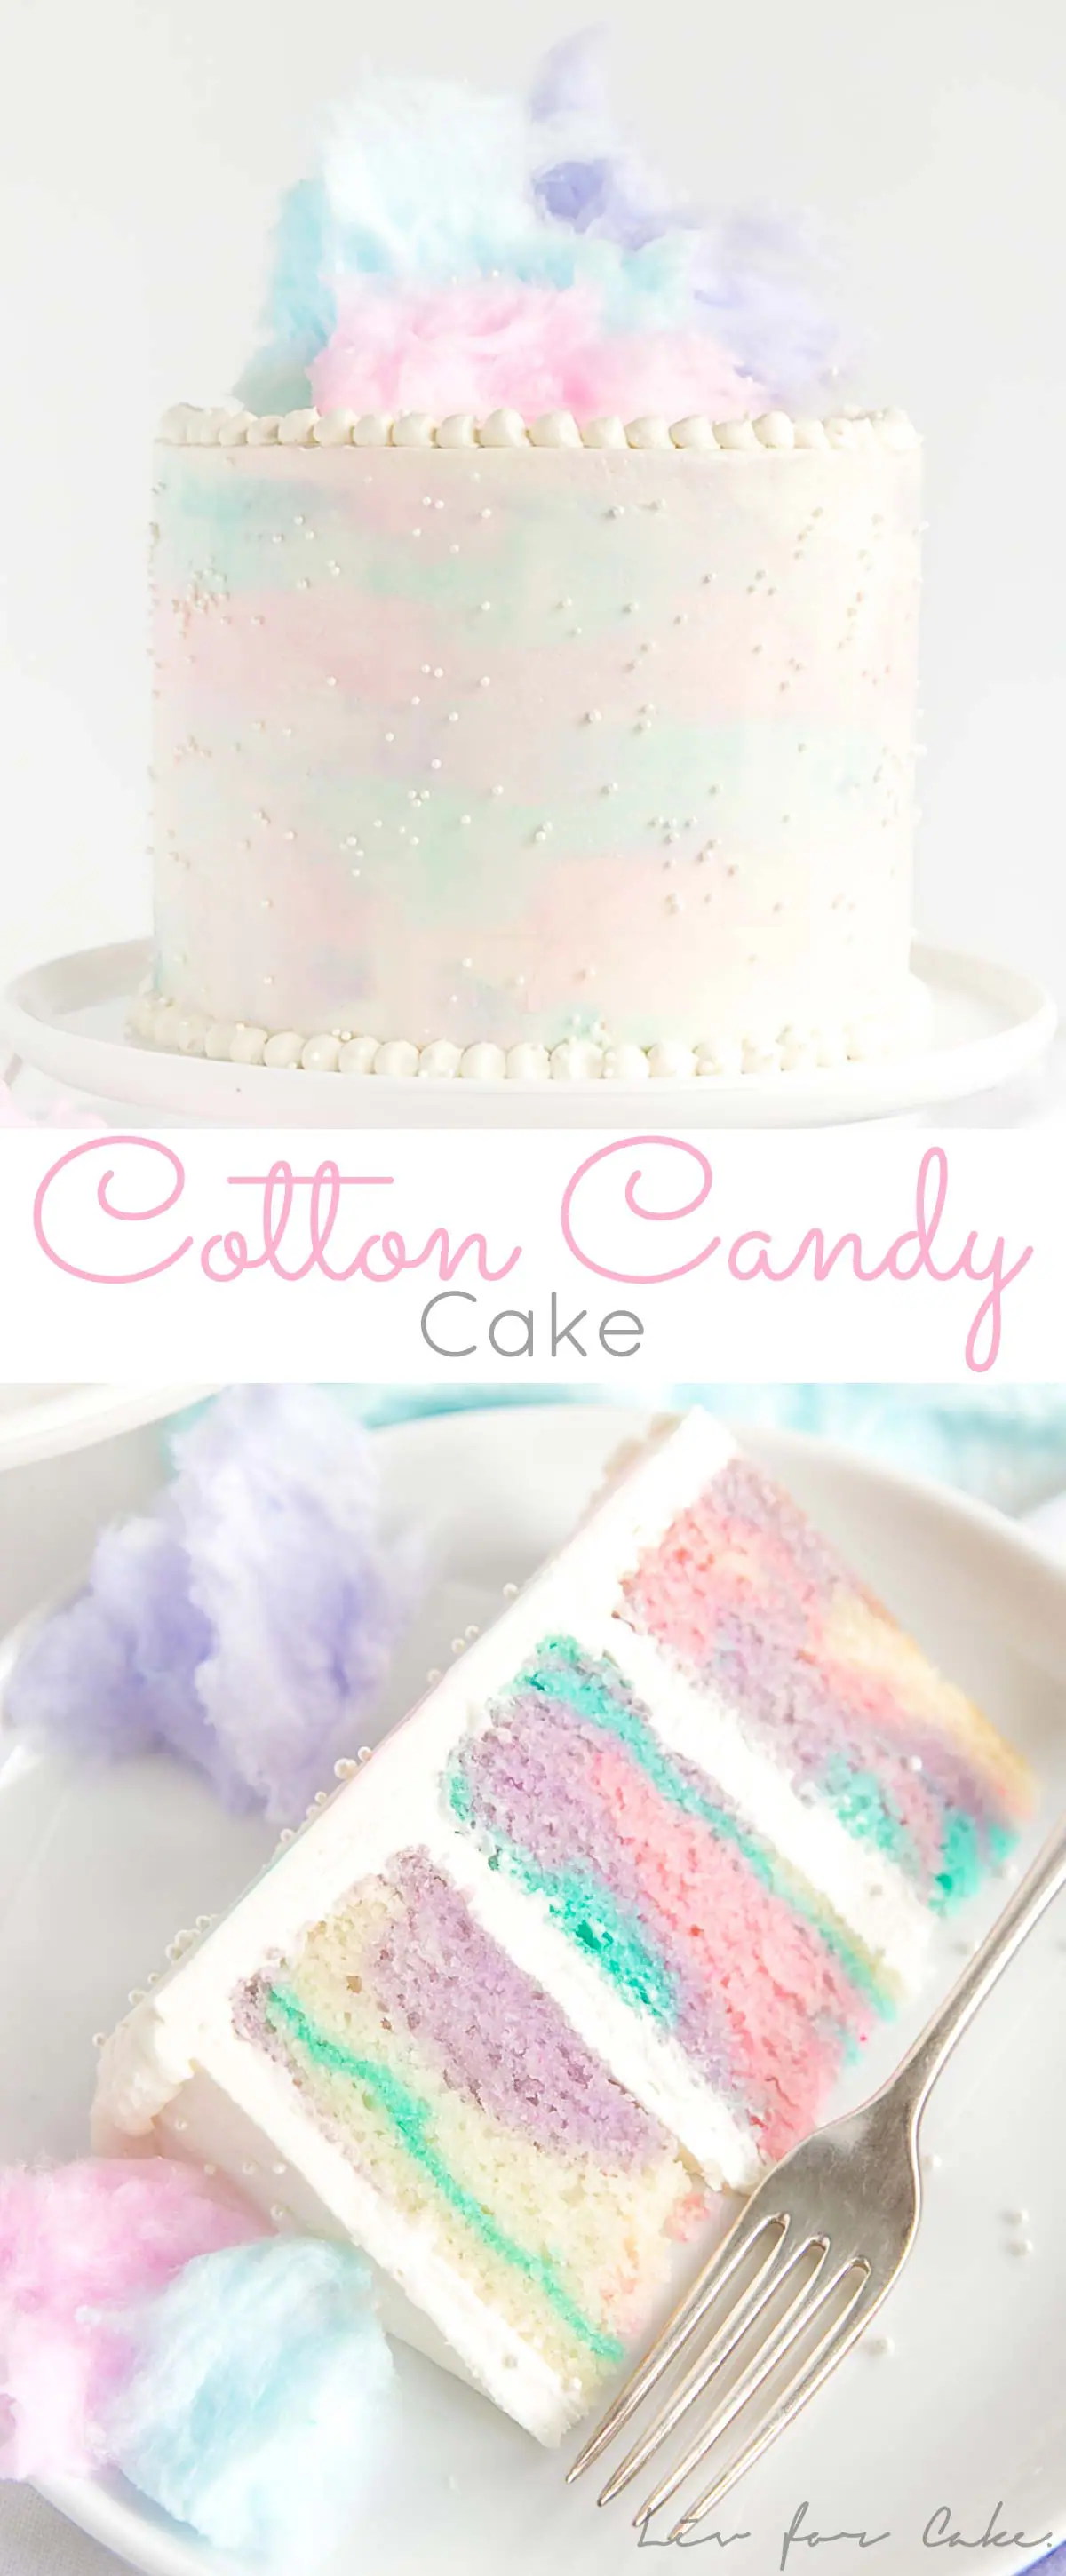 Cotton Candy Cake collage